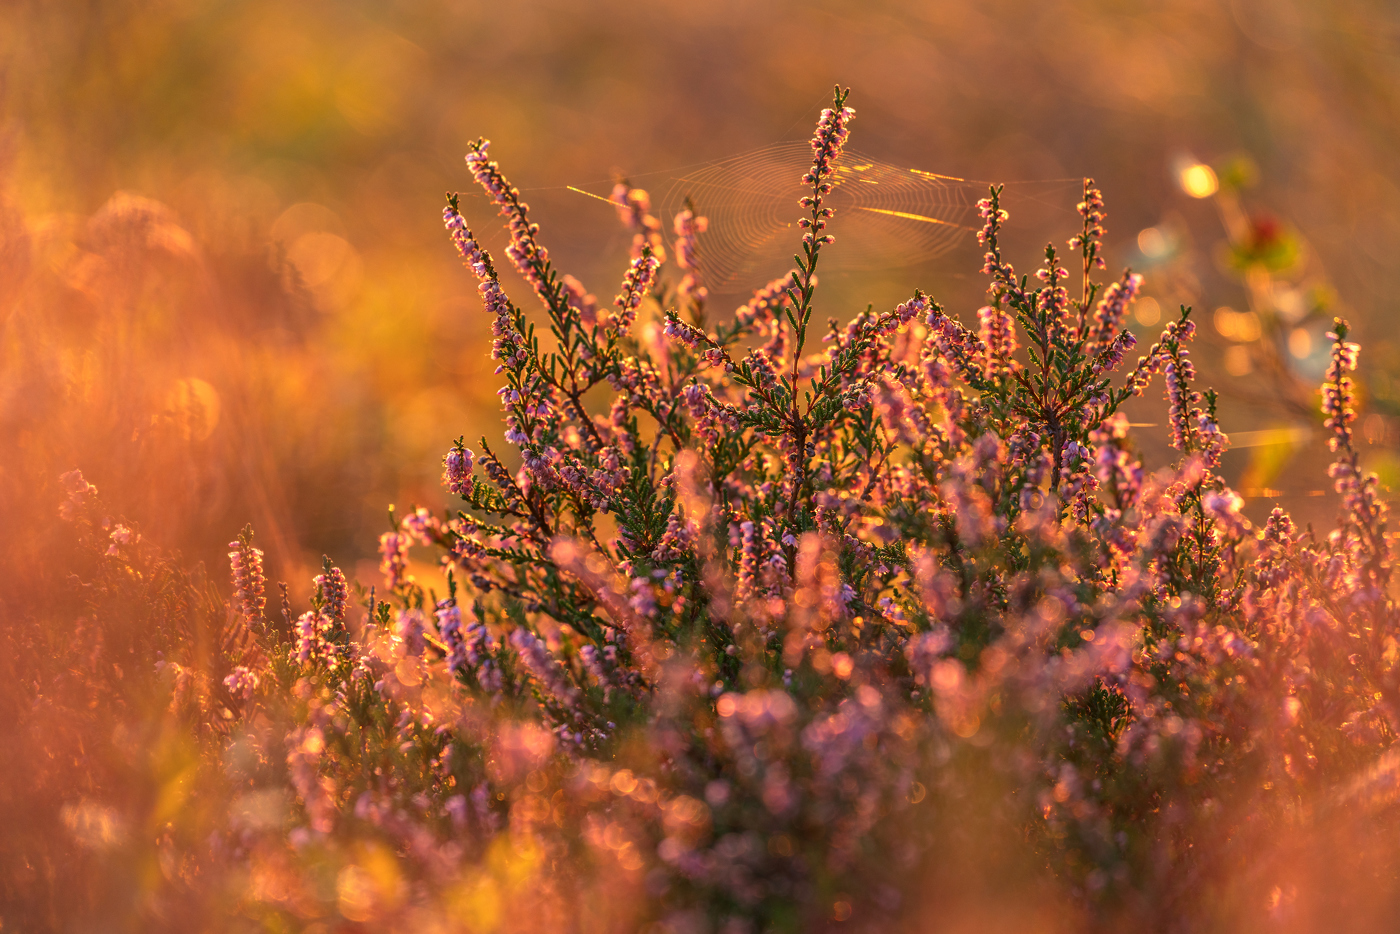 In North Yorkshire, there's an image depicting a close-up of vibrant purple heather bathed in warm, golden sunlight. Delicate spider webs glisten between the blooms, and the soft focus background is awash with hues of amber and gold, suggesting a serene, natural setting at sunrise. a close up of a plant